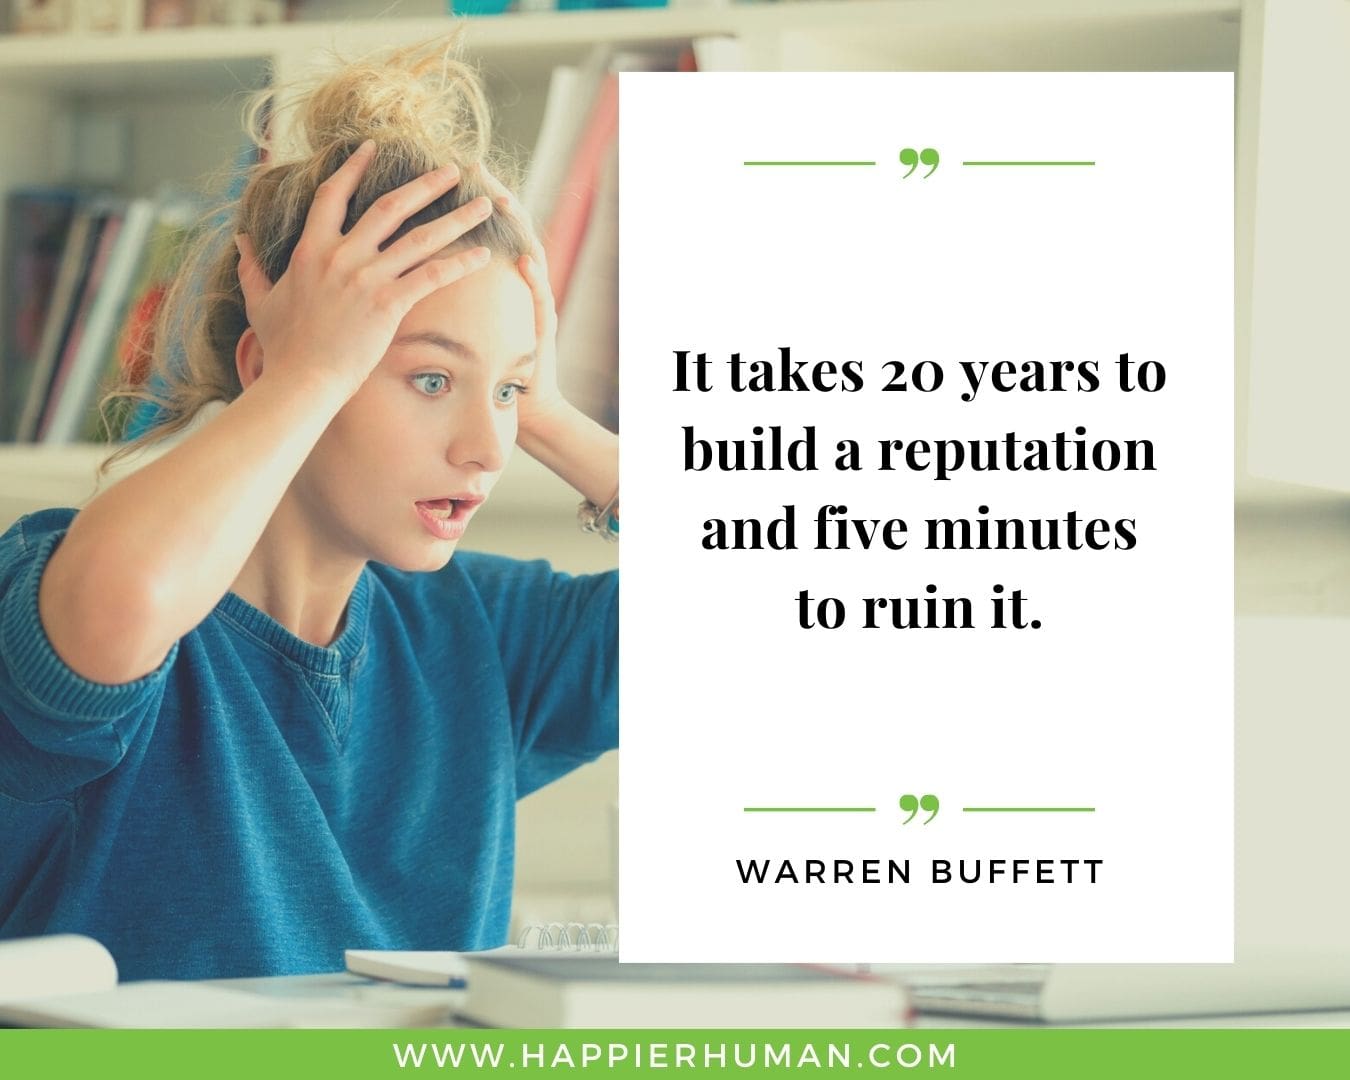 Broken Trust Quotes - “It takes 20 years to build a reputation and five minutes to ruin it.” - Warren Buffett